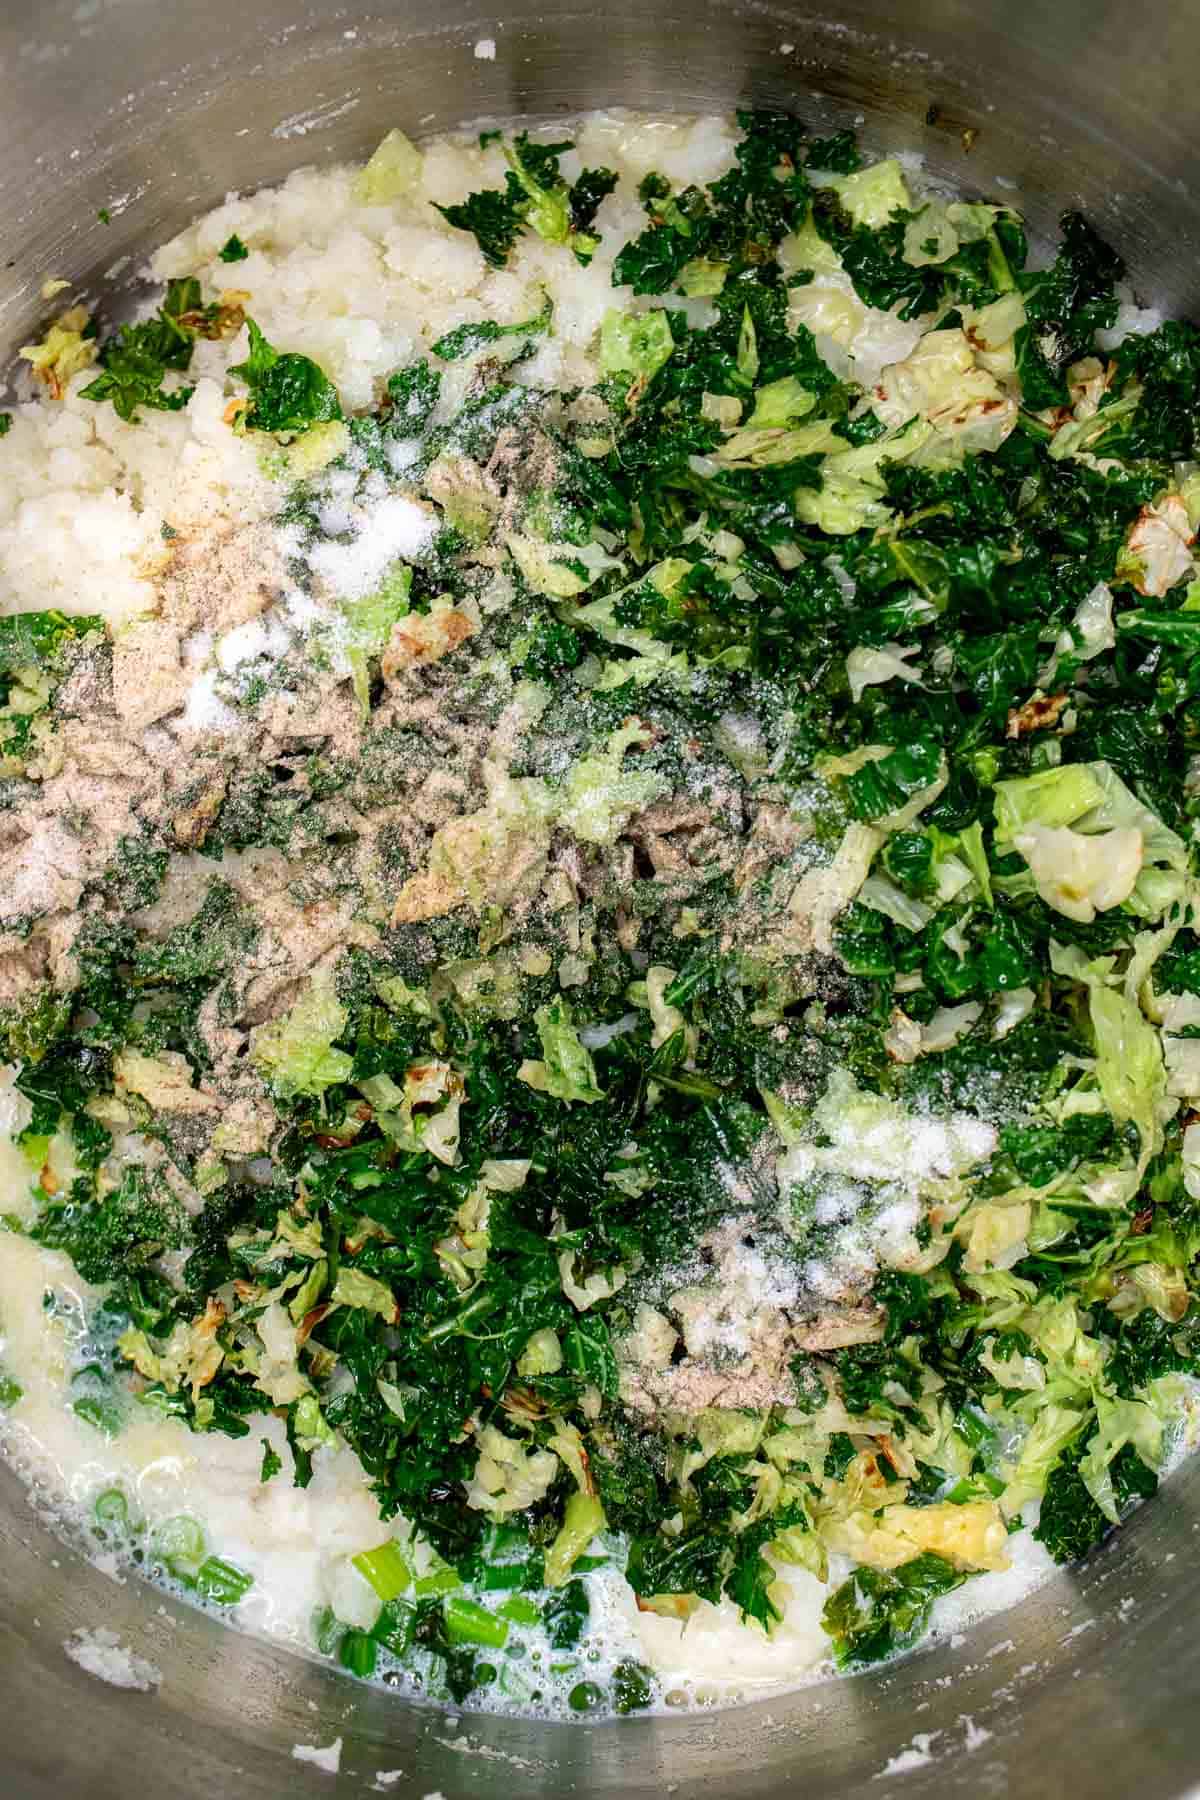 Cabbage, kale, salt, pepper, and scallion-onion mixture added to the mashed potatoes.